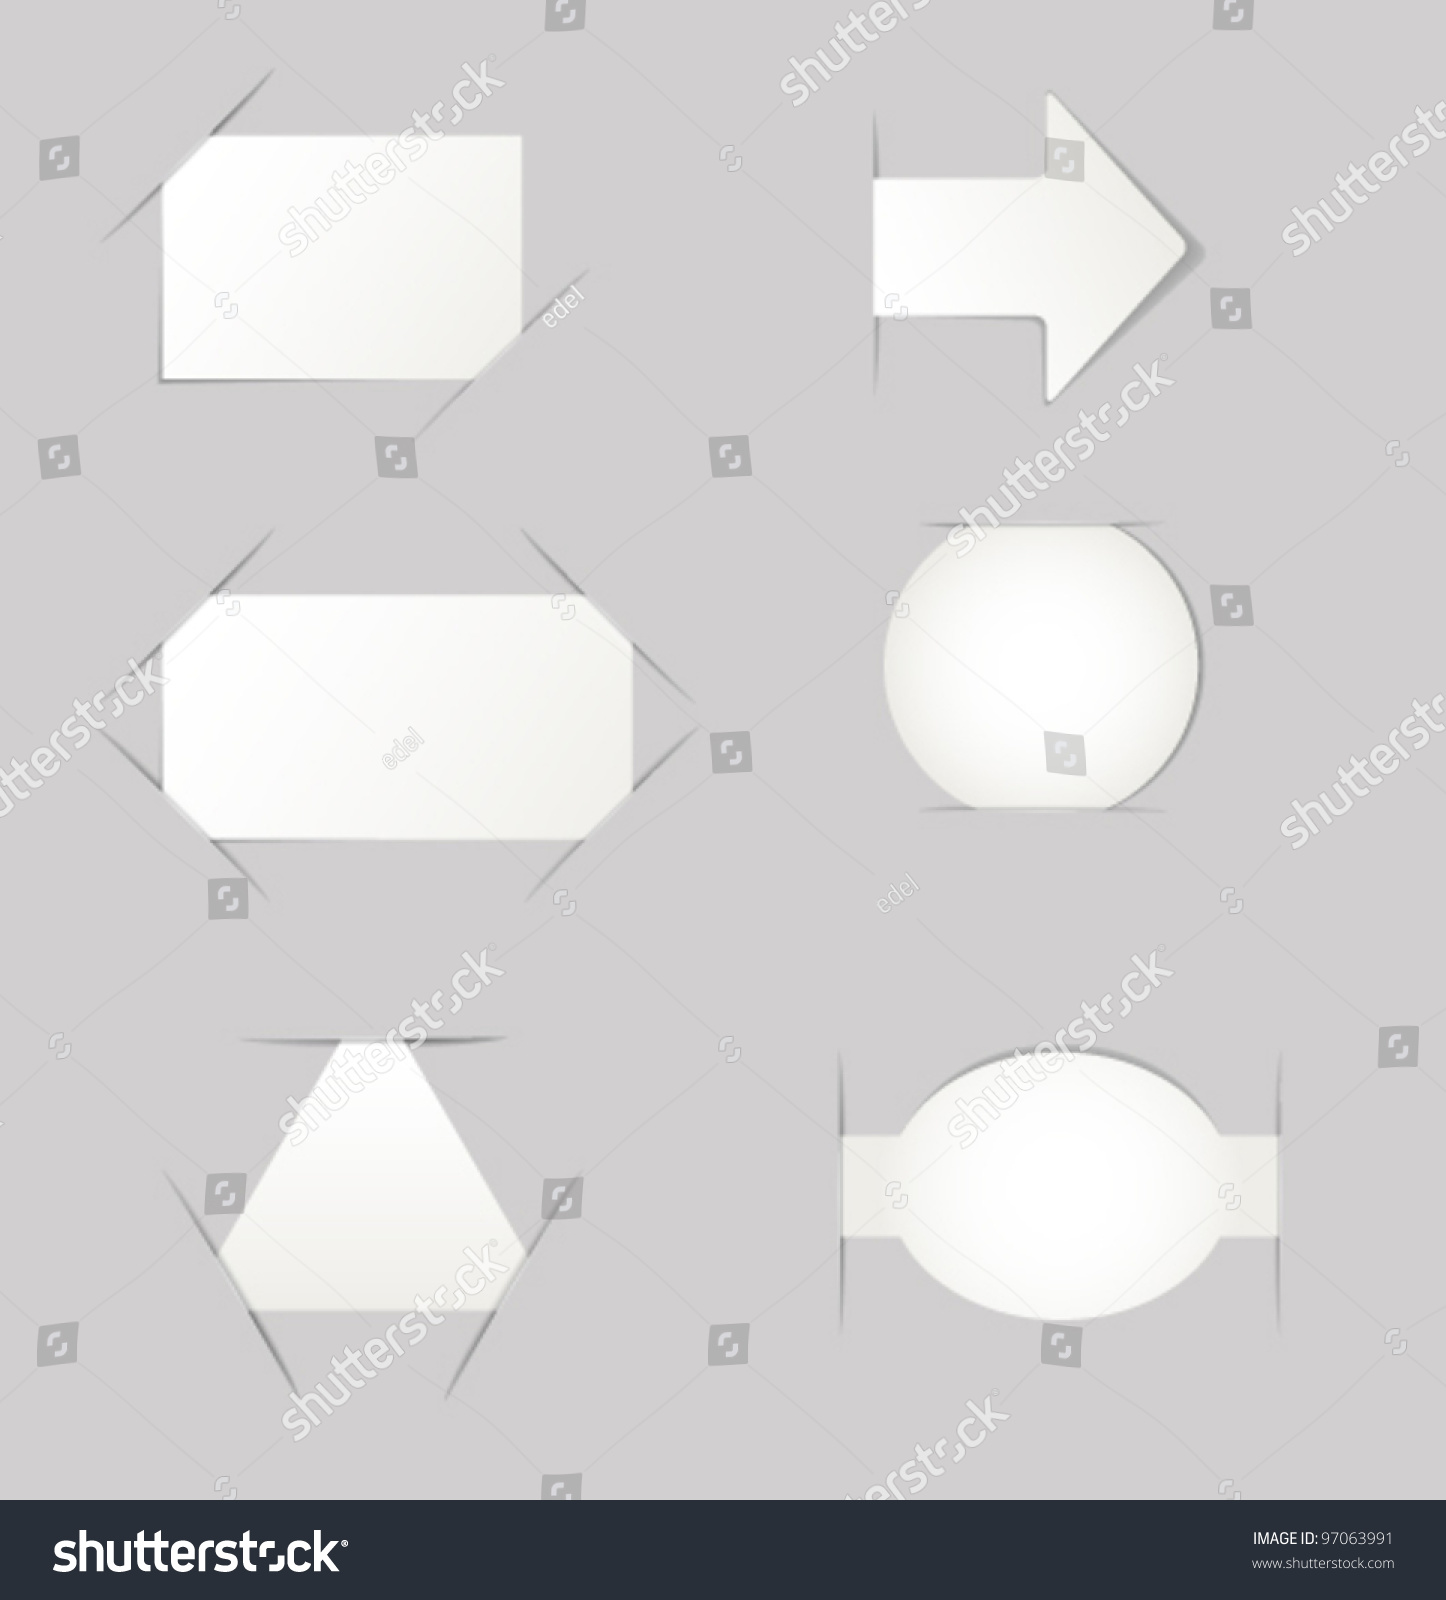 SVG of set of paper, mounted in pockets,with photo frame corners svg